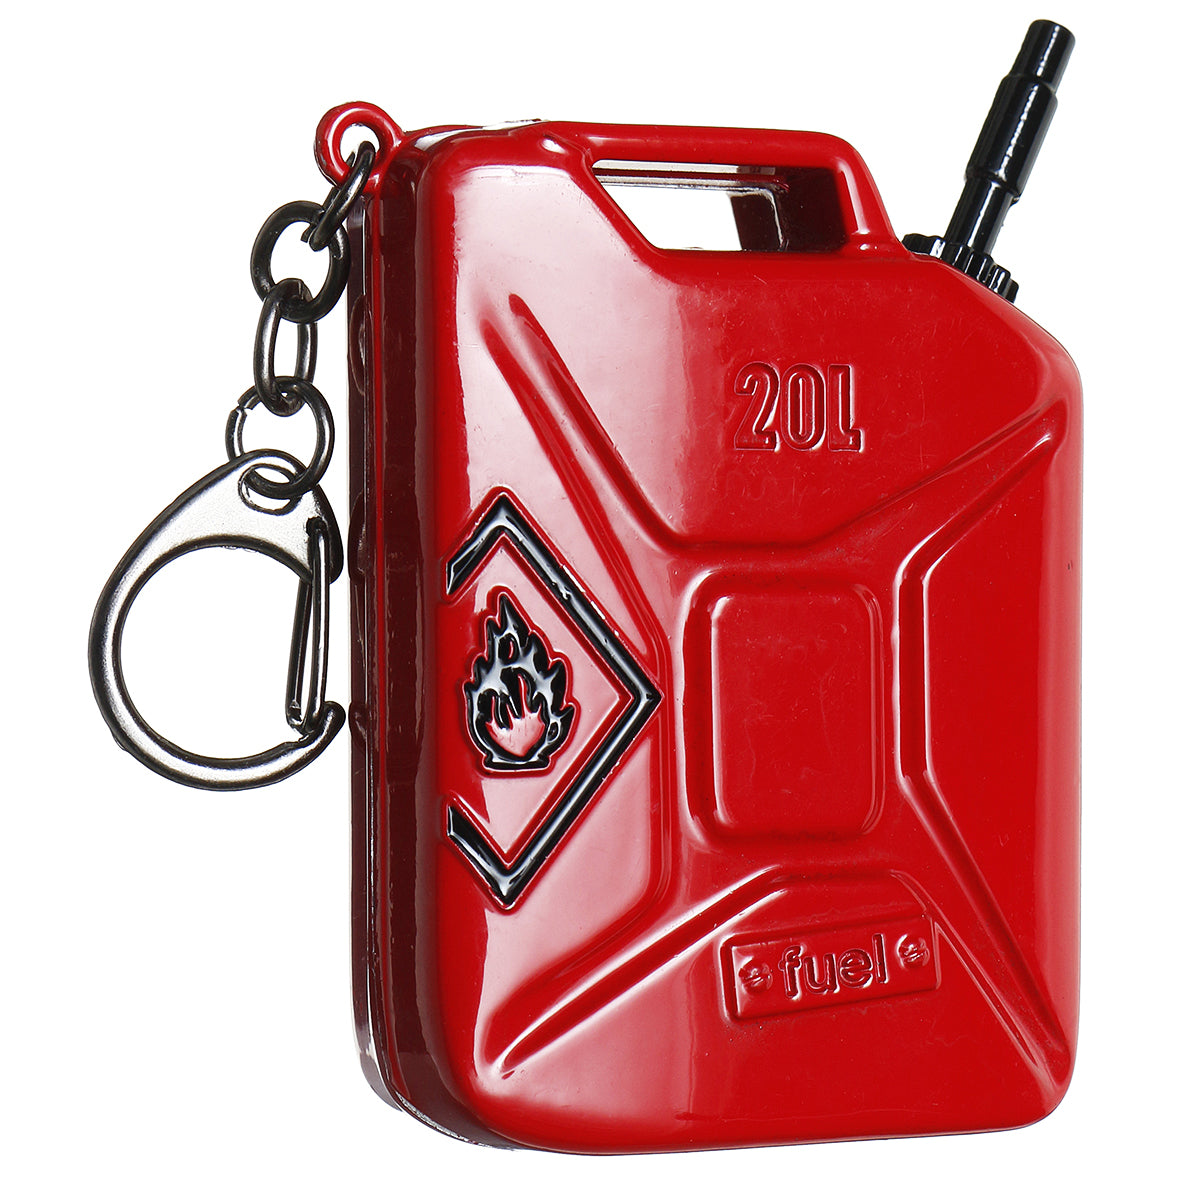 Firebrick Zinc Alloy Fuel Grenade Weapons Decorative Hanging Key Chains Keychain